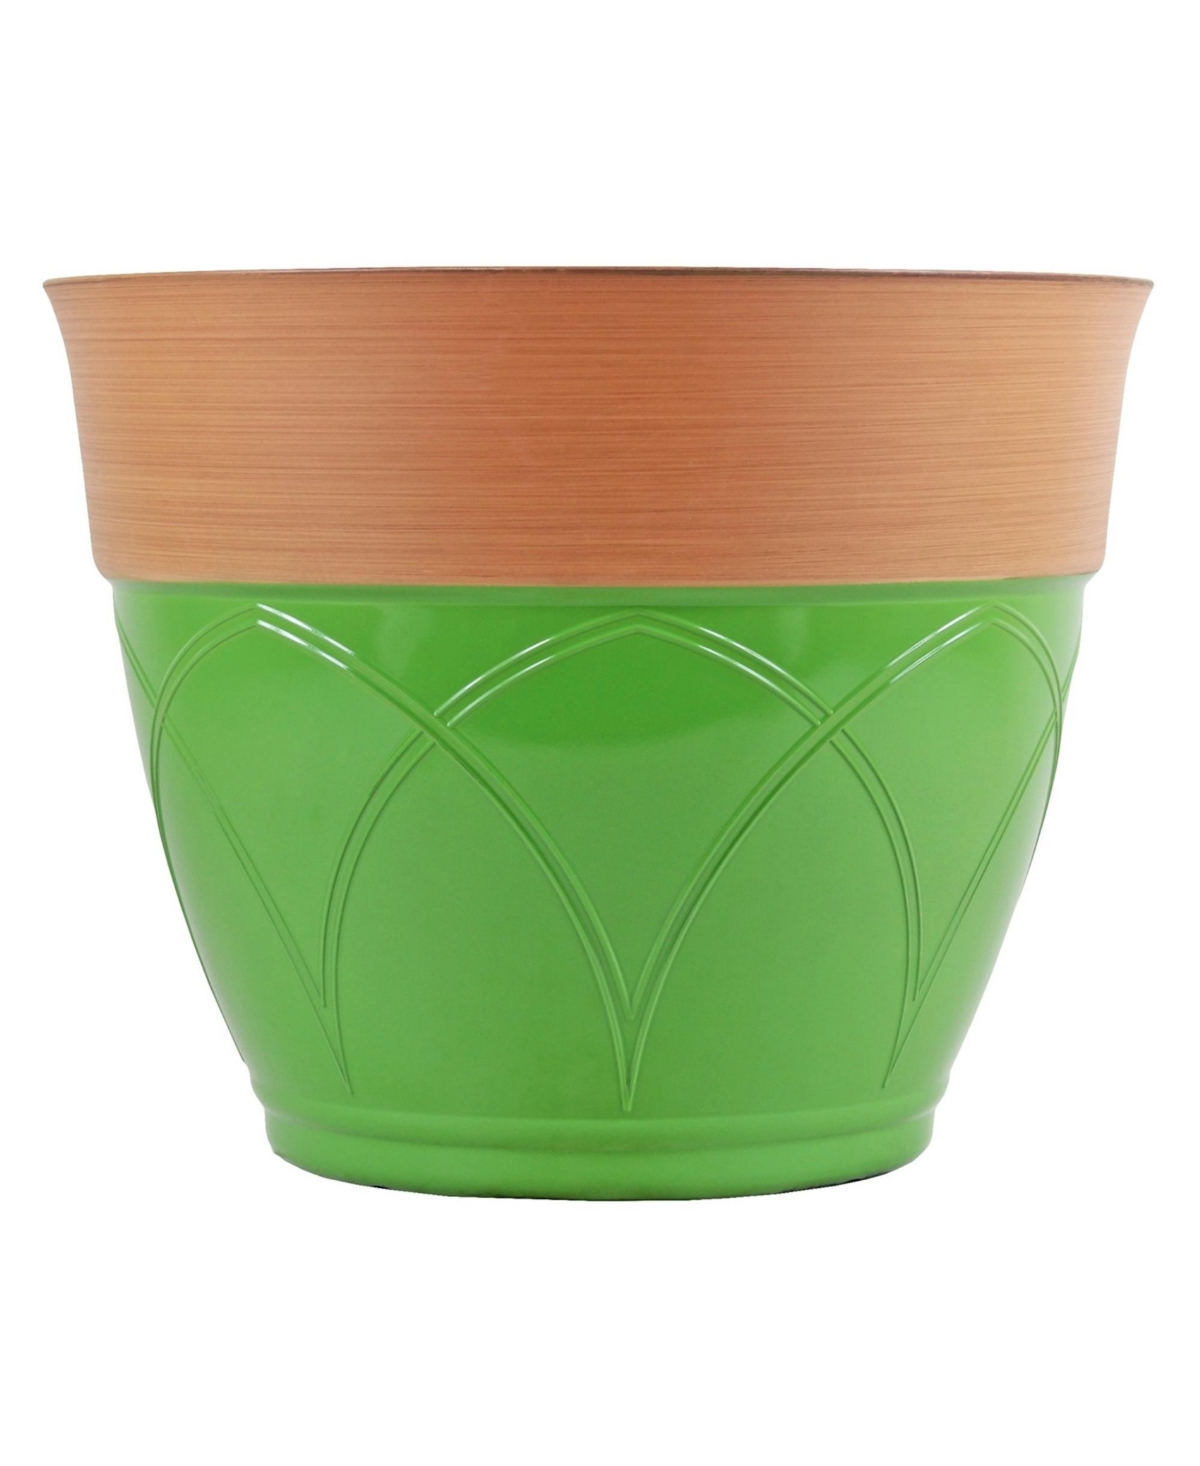 Colored Rim Large Plastic Planter Green 15 Inches - Green